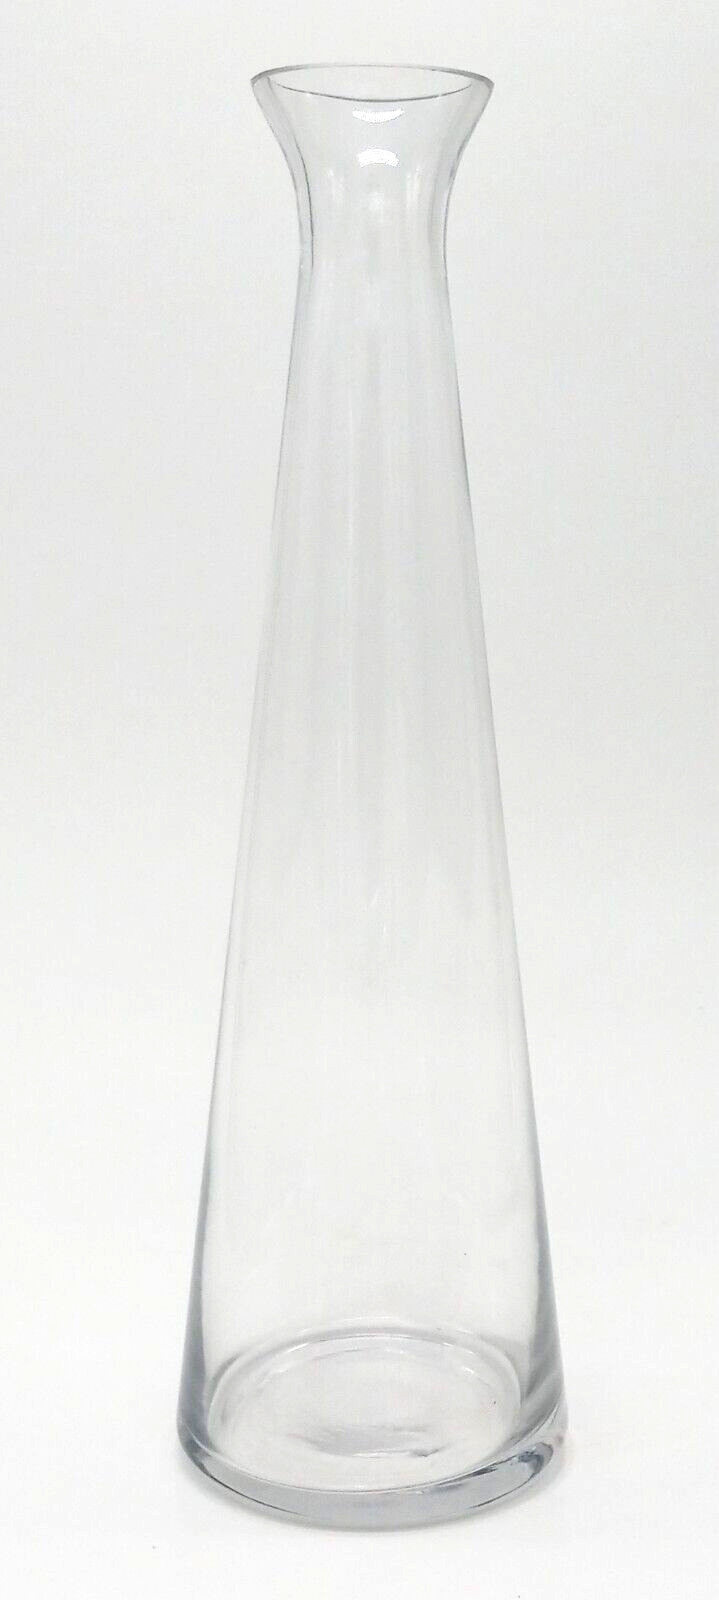 Tall Clear Colored Glass Round Vase H 11.75 inches Vintage Style Bottle